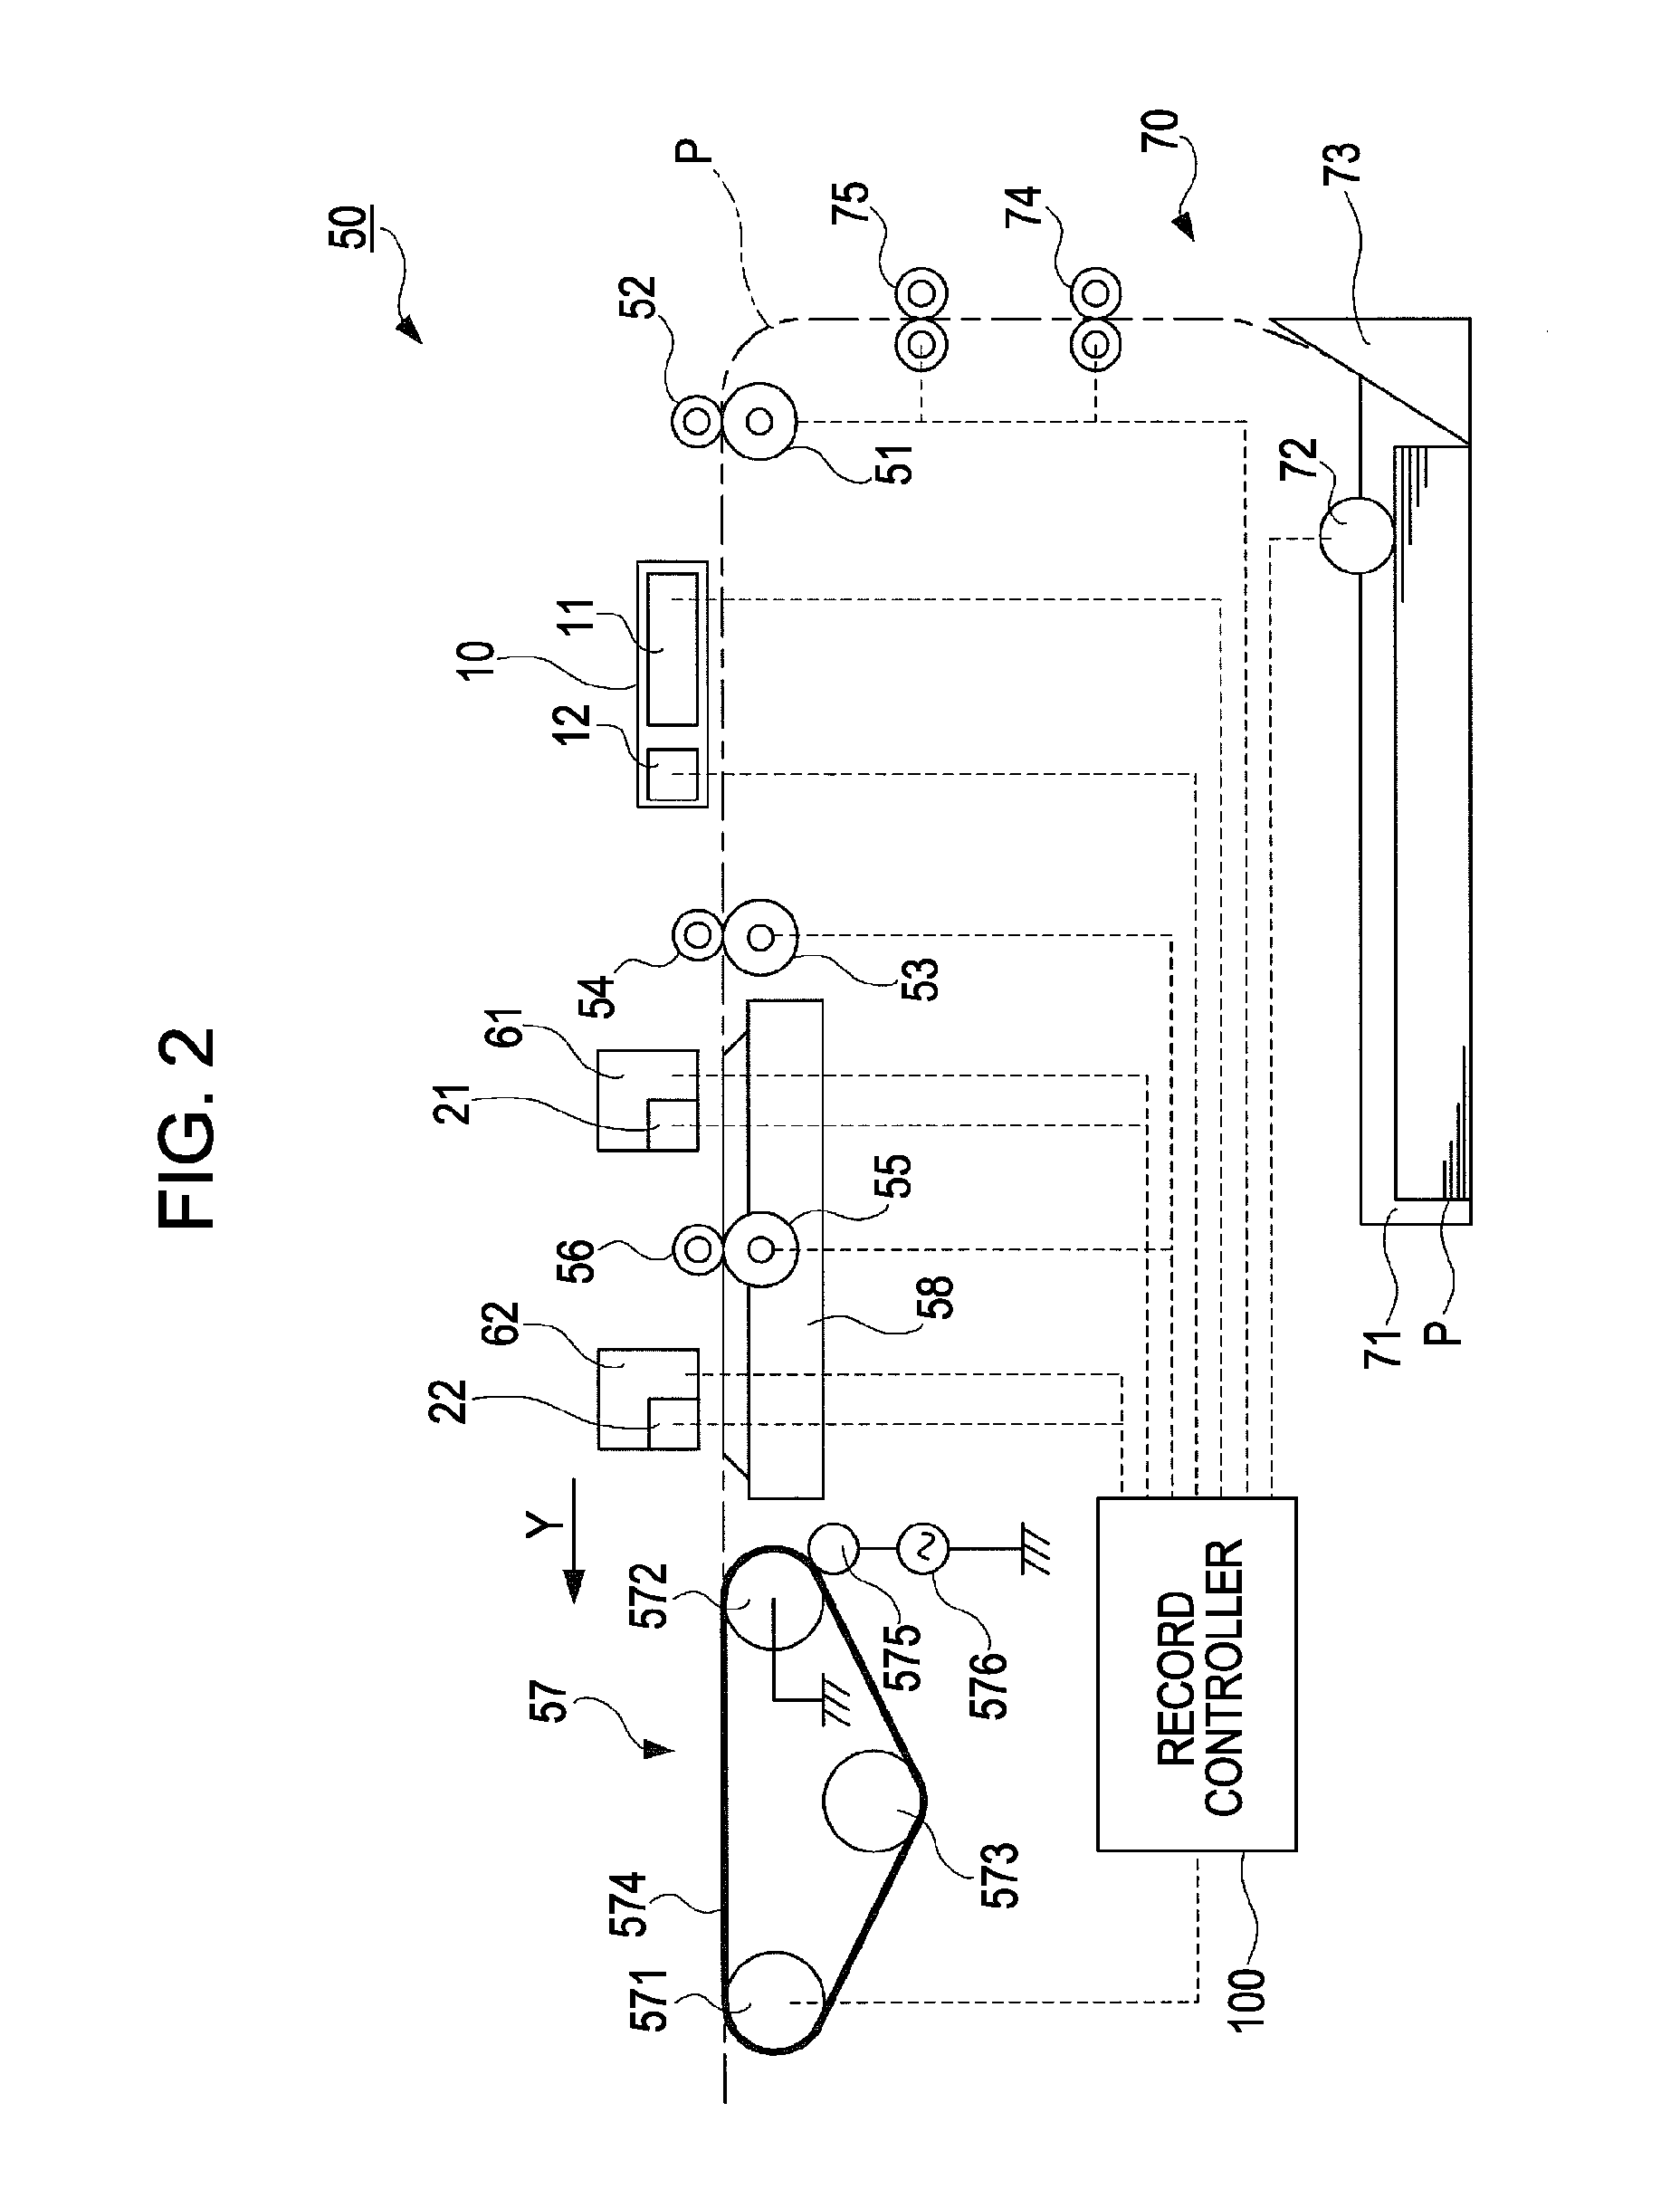 Reference mark forming device and recording apparatus provided with the reference mark forming device